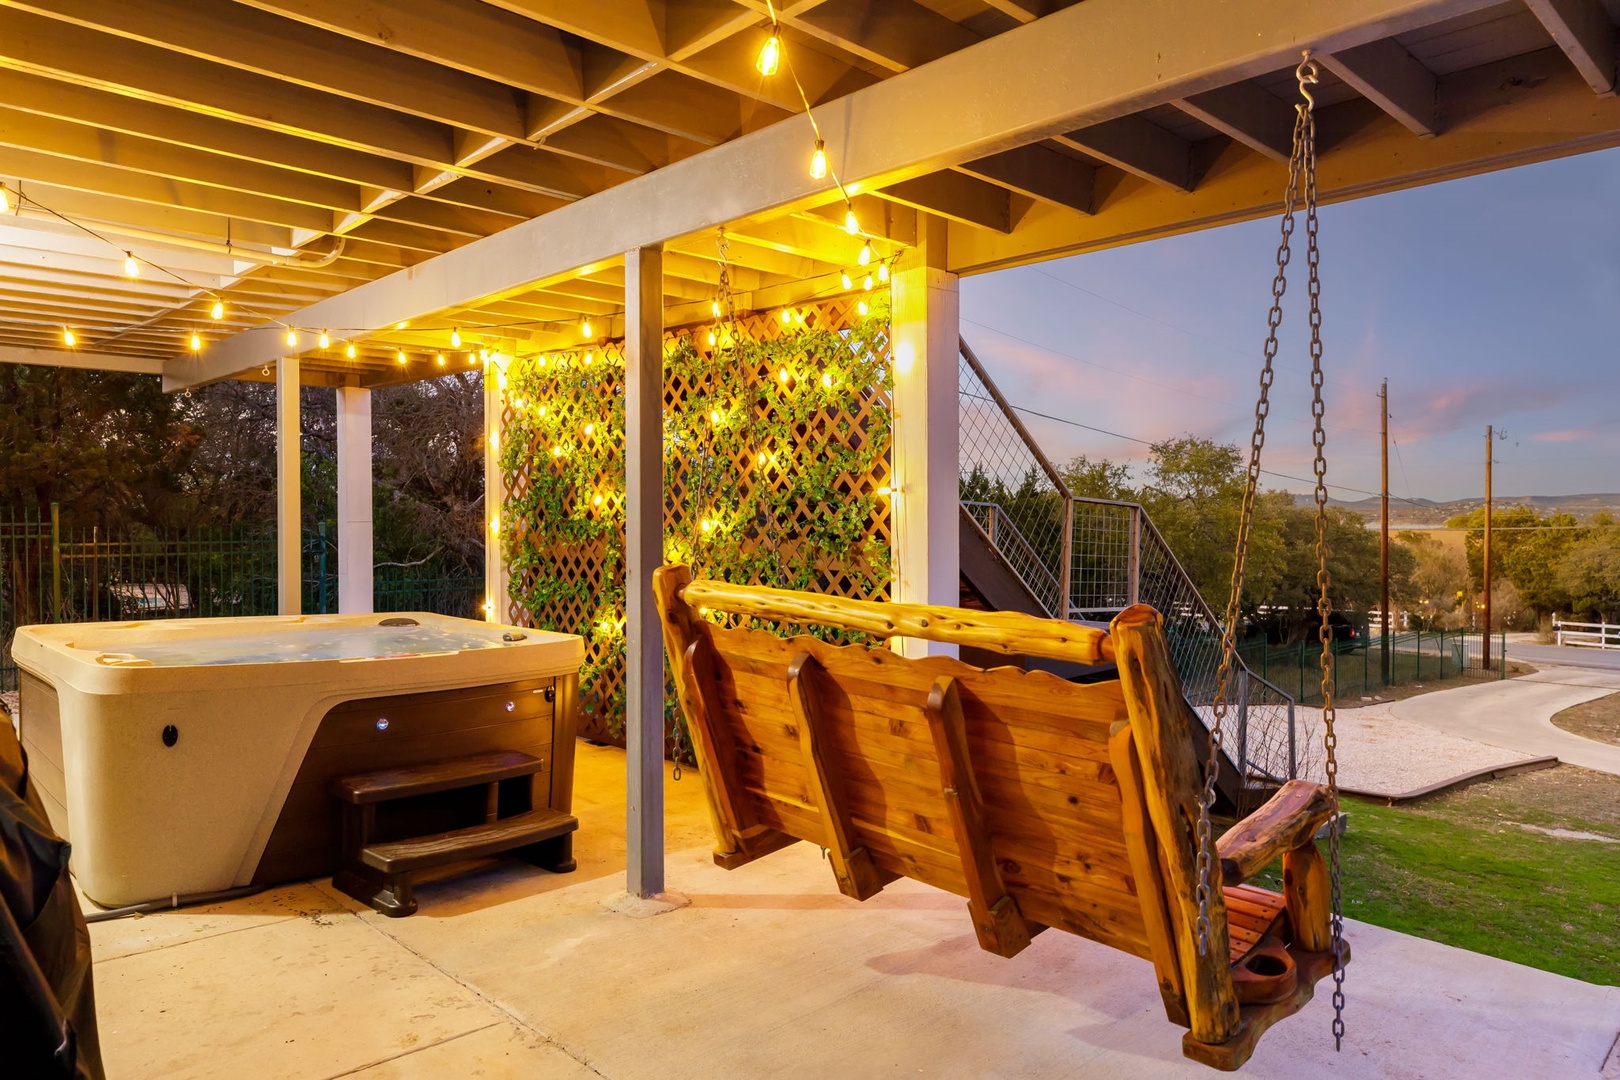 Sway in the fresh air or soak the day away in the hot tub on the lower-level patio